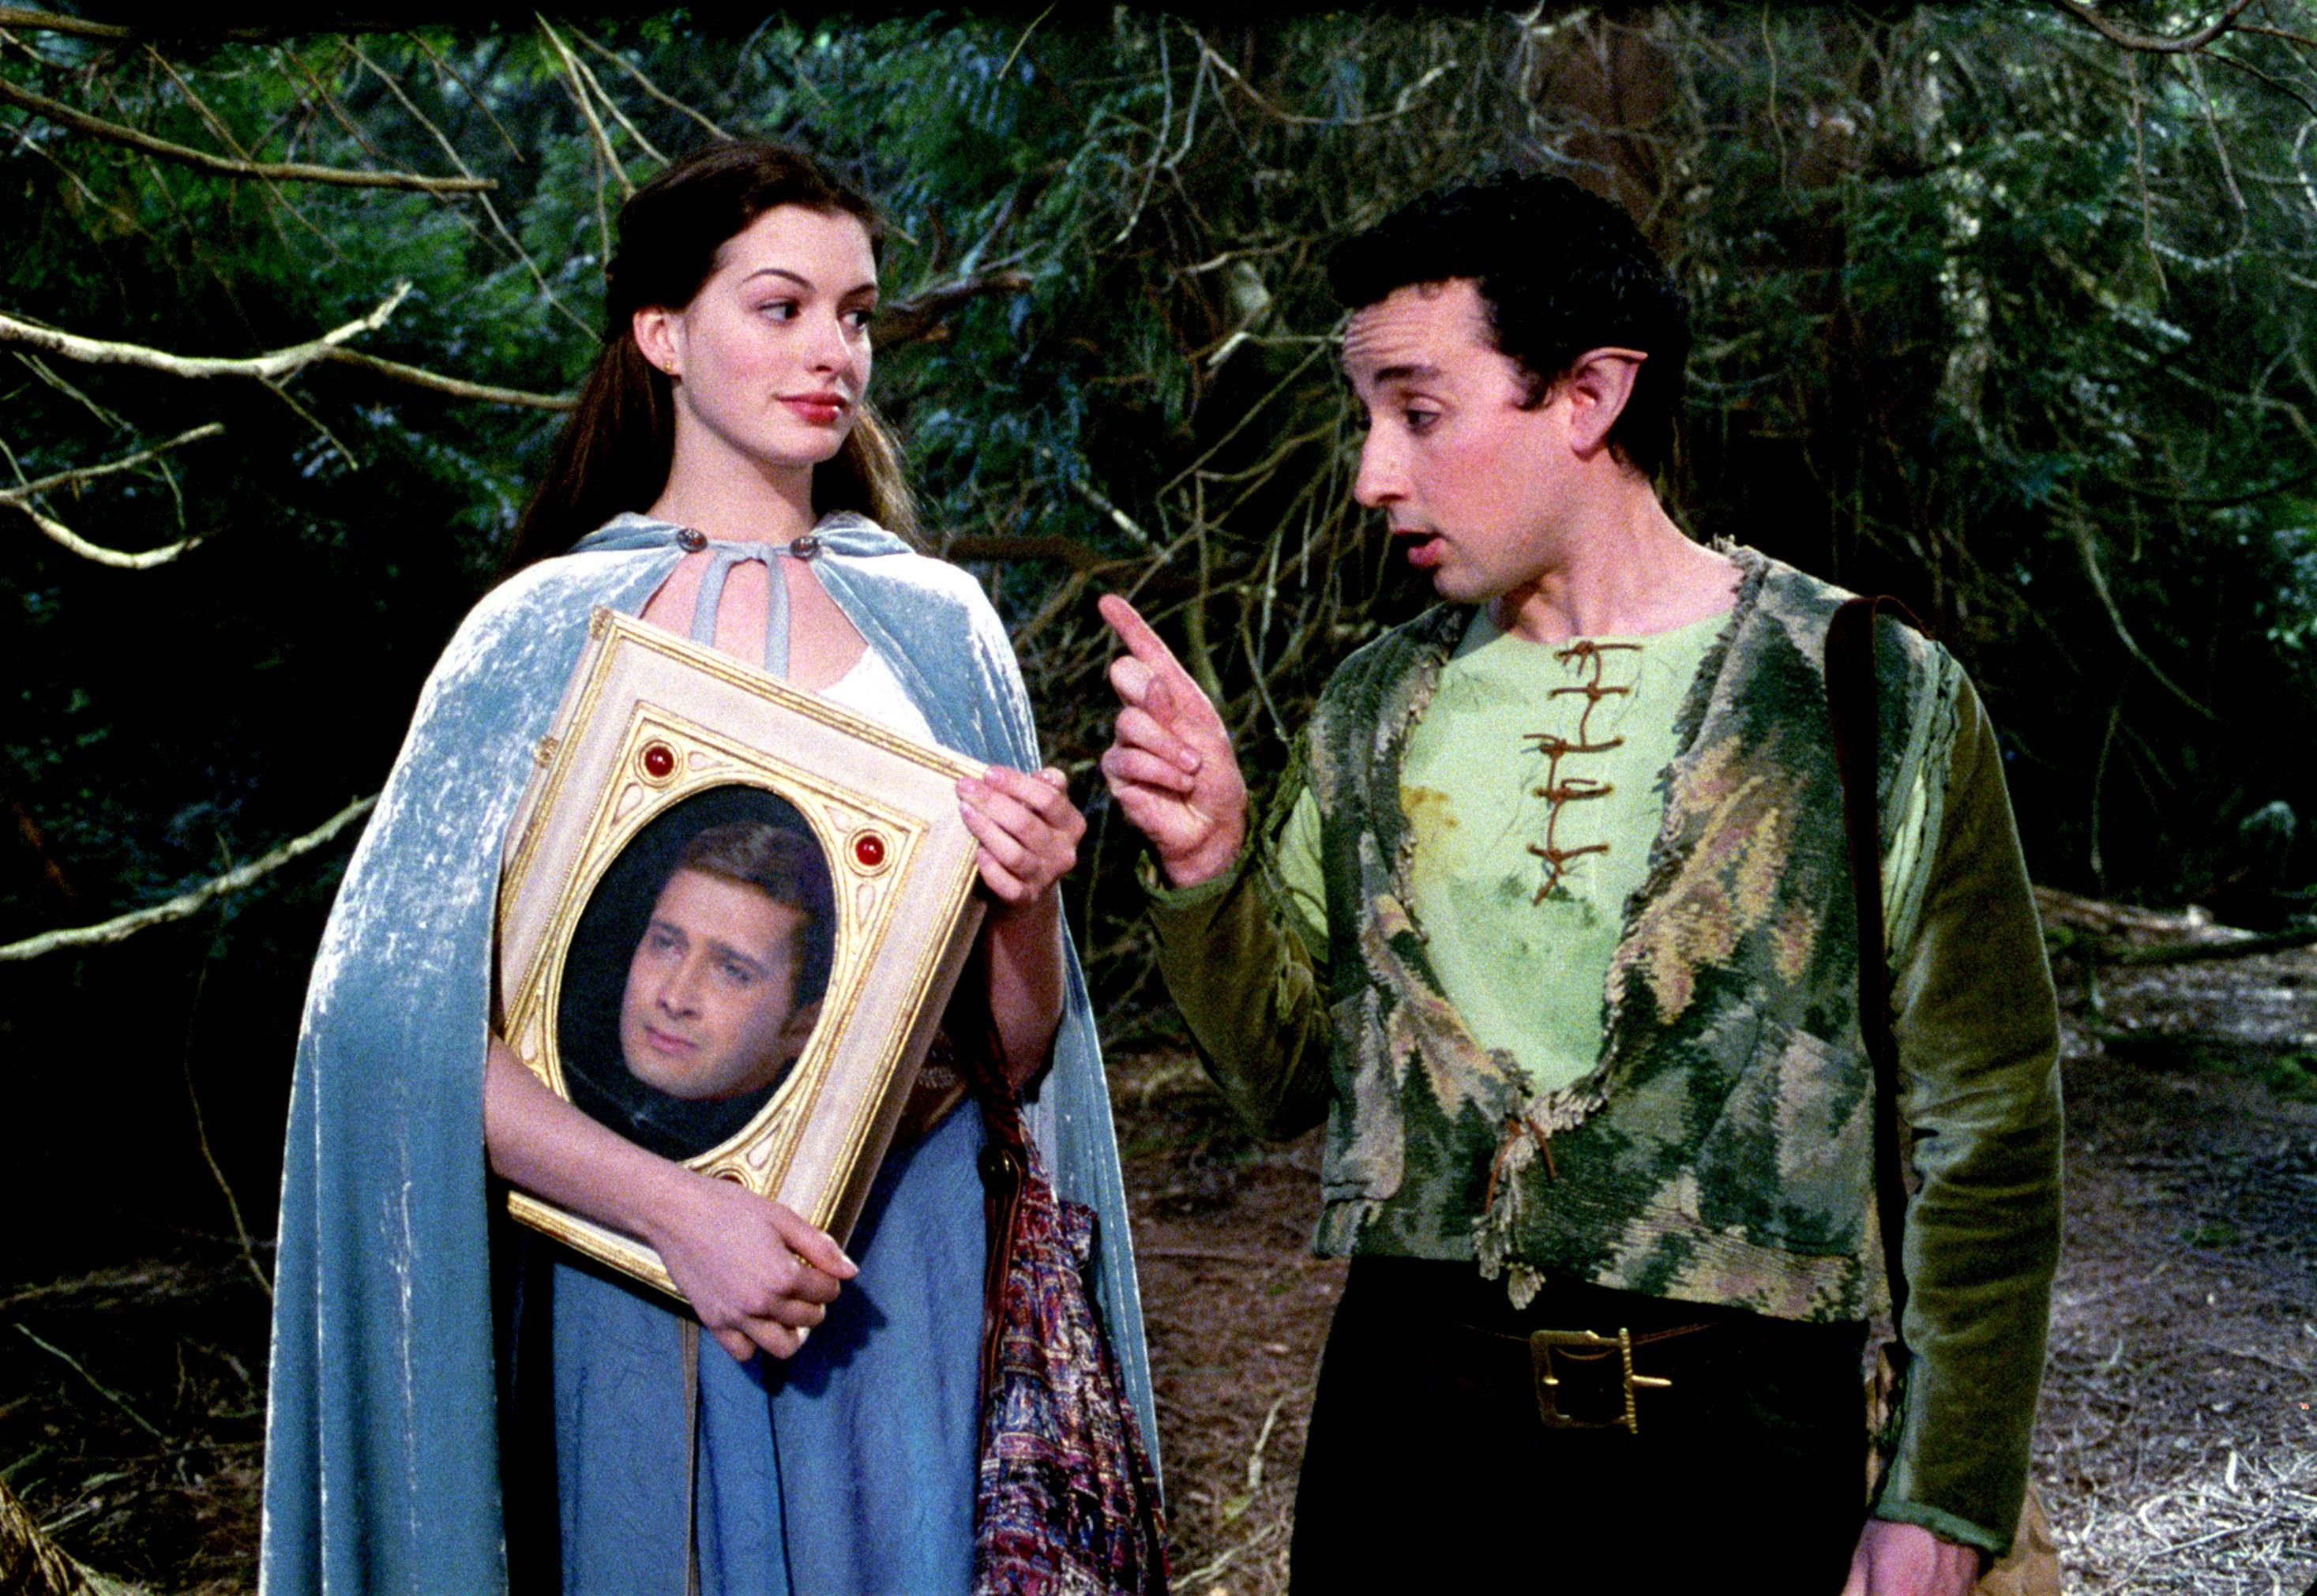 Anne Hathaway and Aidan McArdle standing in a forest in medieval clothing in ella enchanted